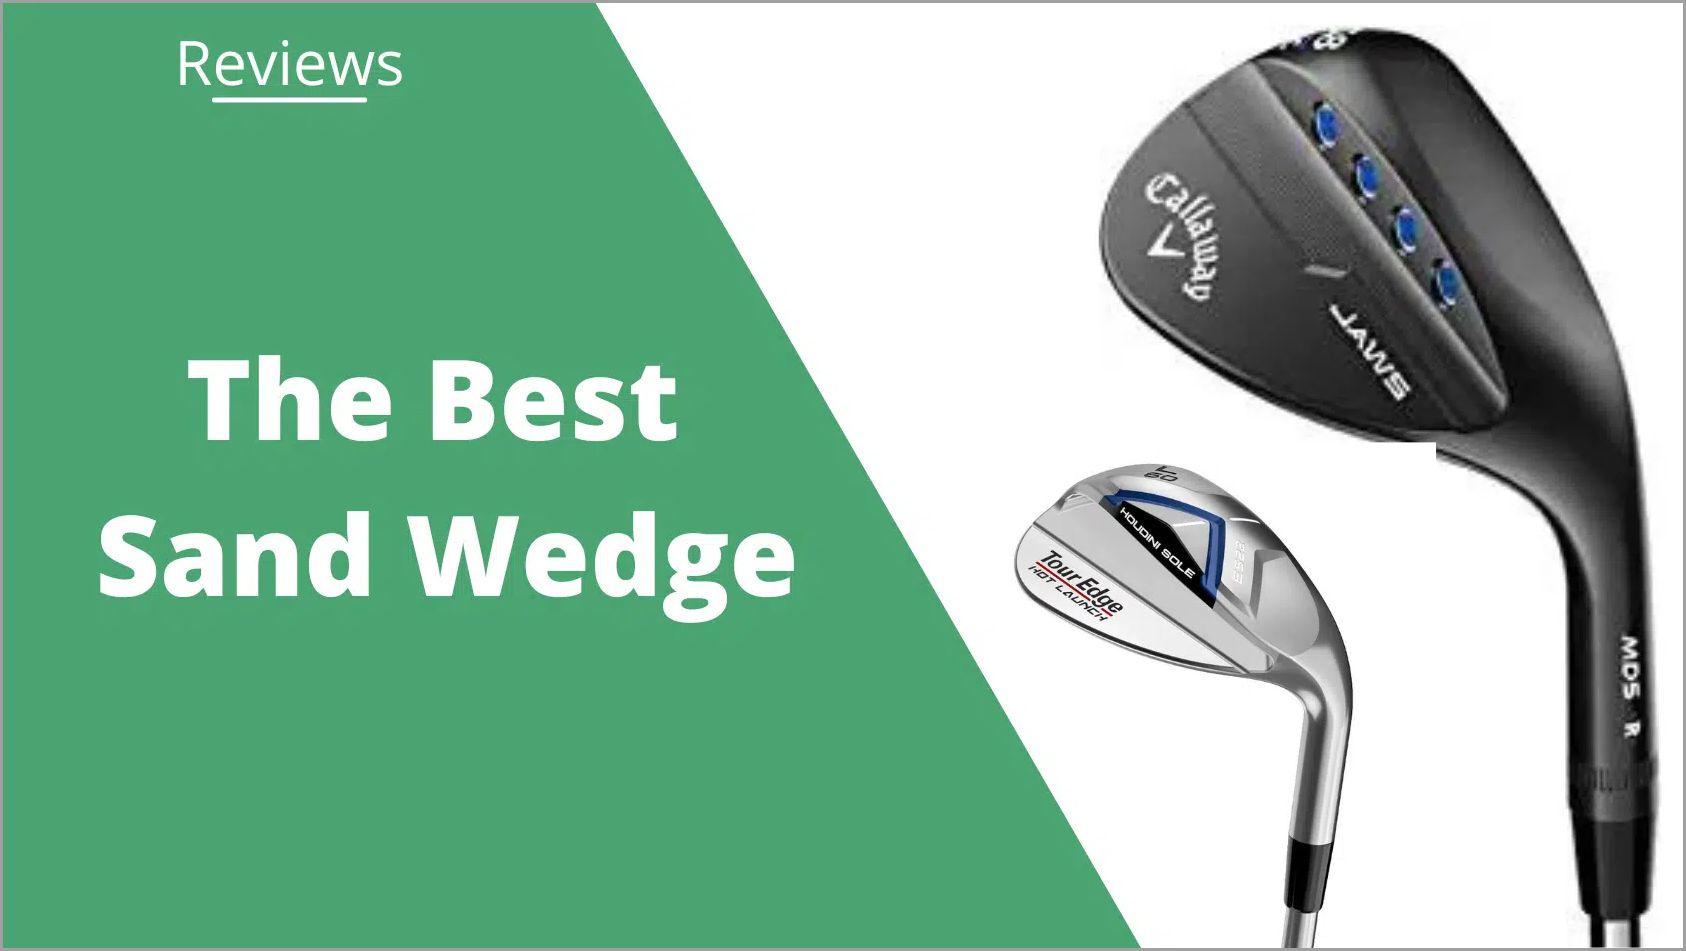 Key Features of a Lob Wedge